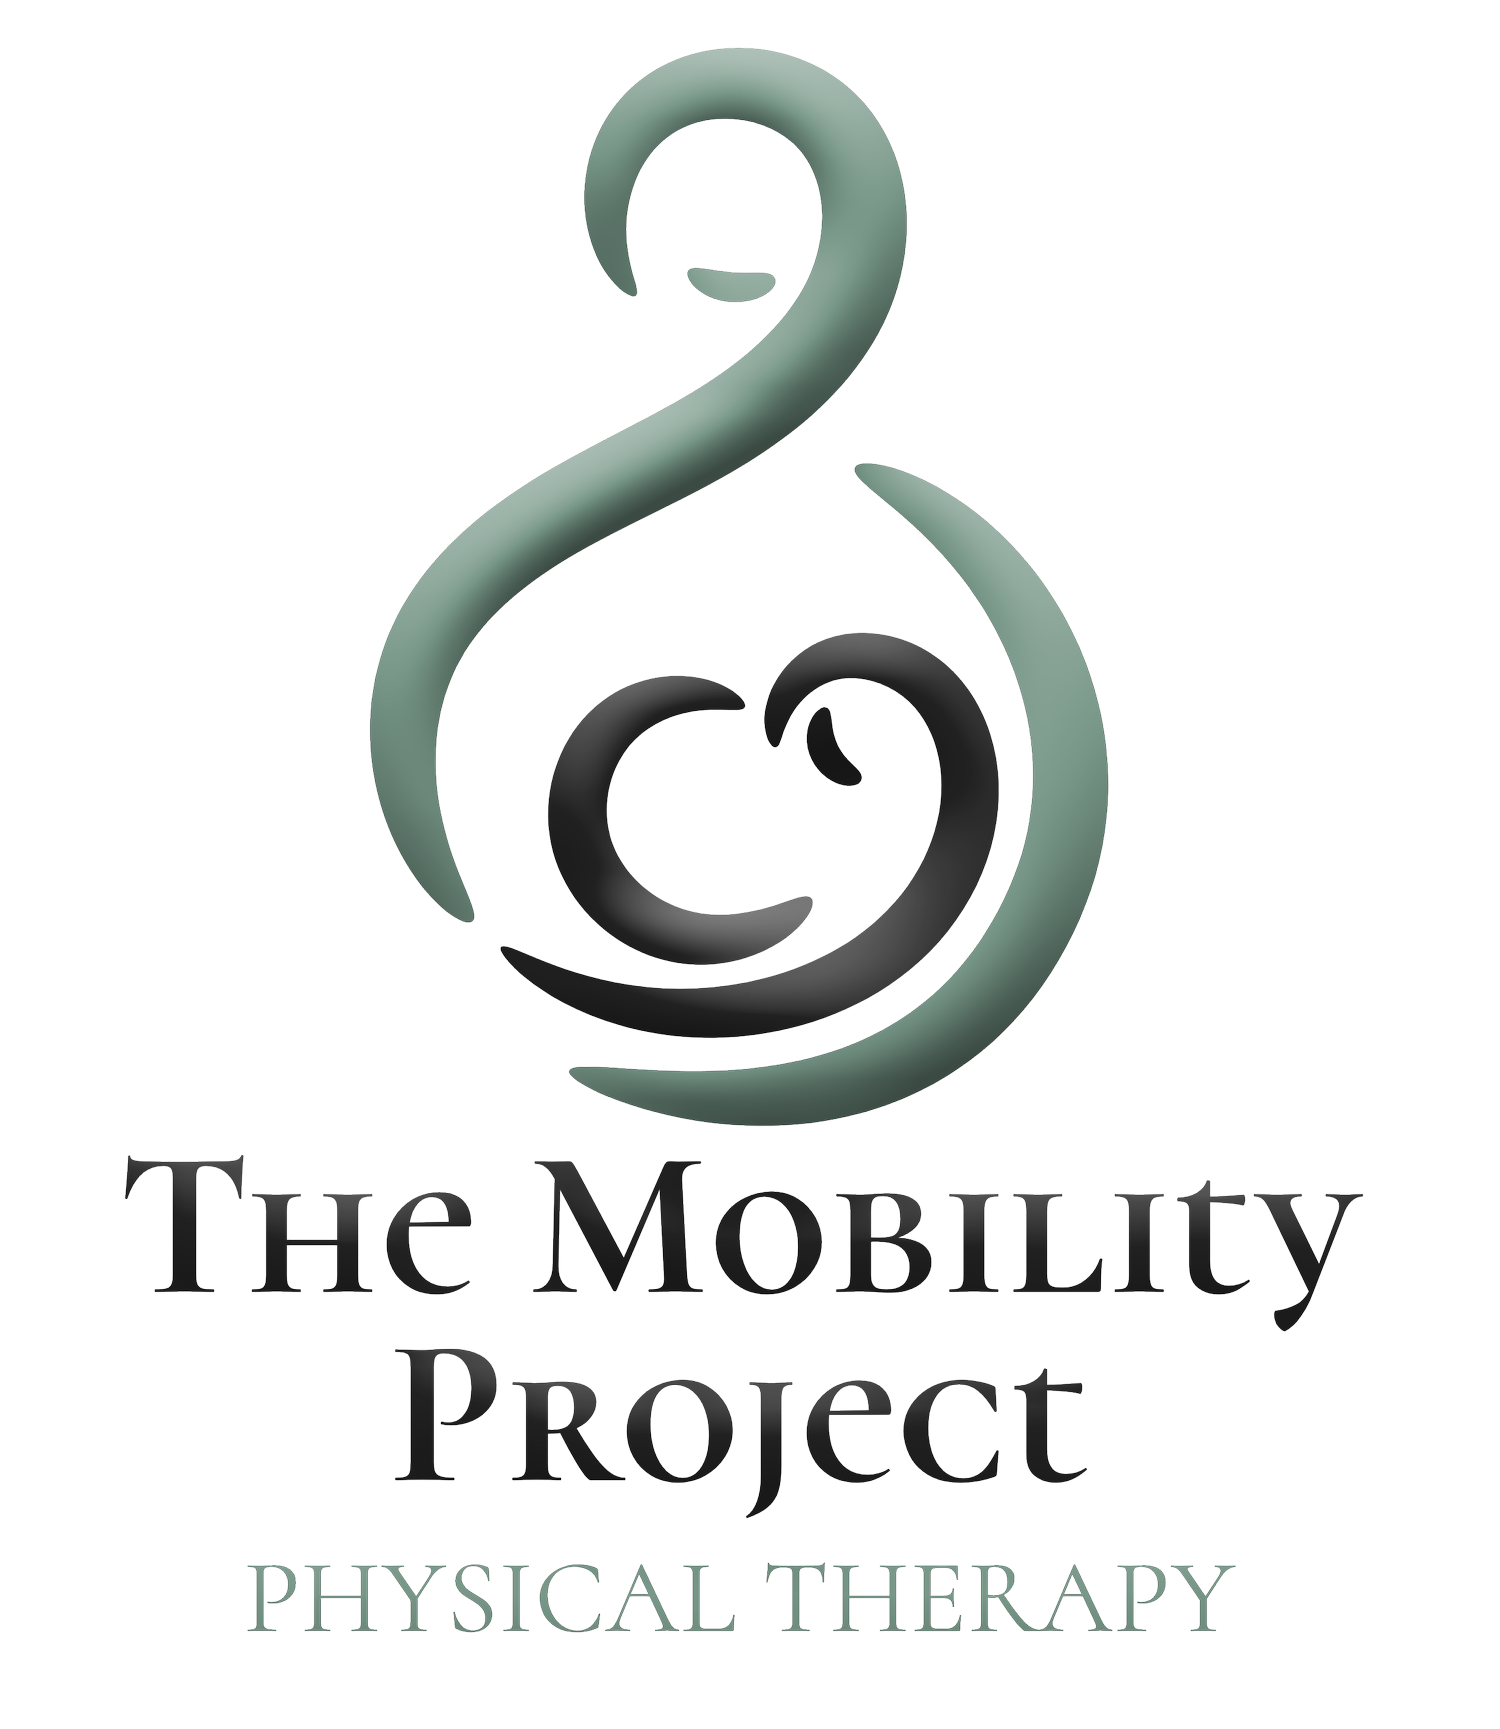 Welcome to The Mobility Project Mother+Baby Healthcare L.V.